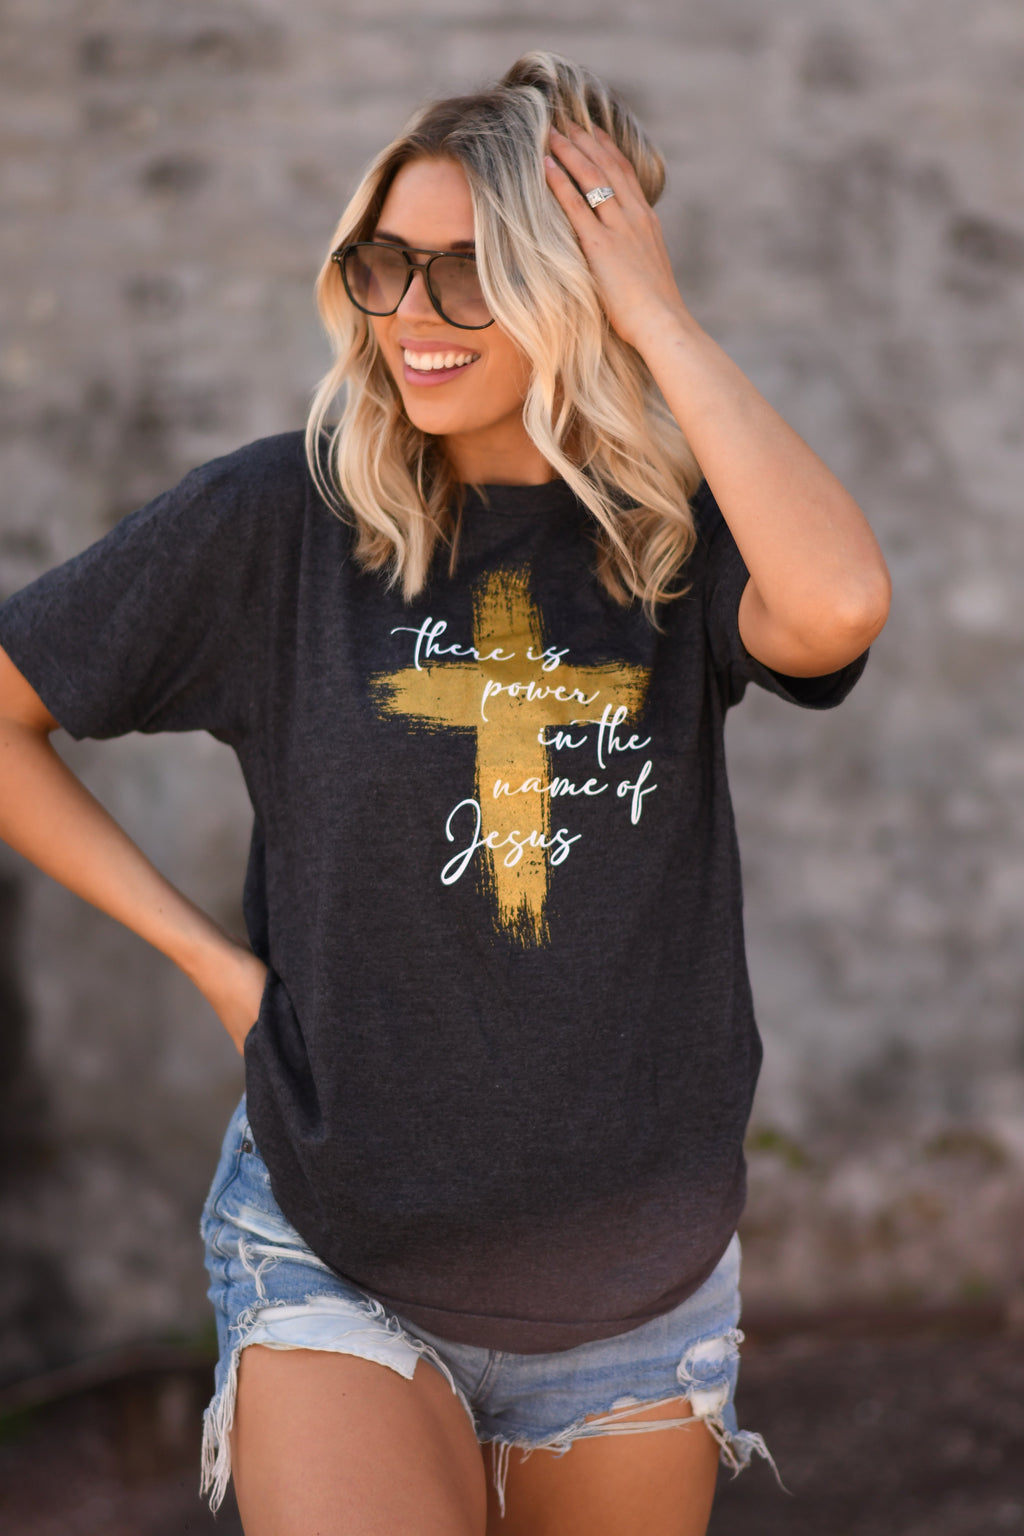 Power In The Name Of Jesus Tee